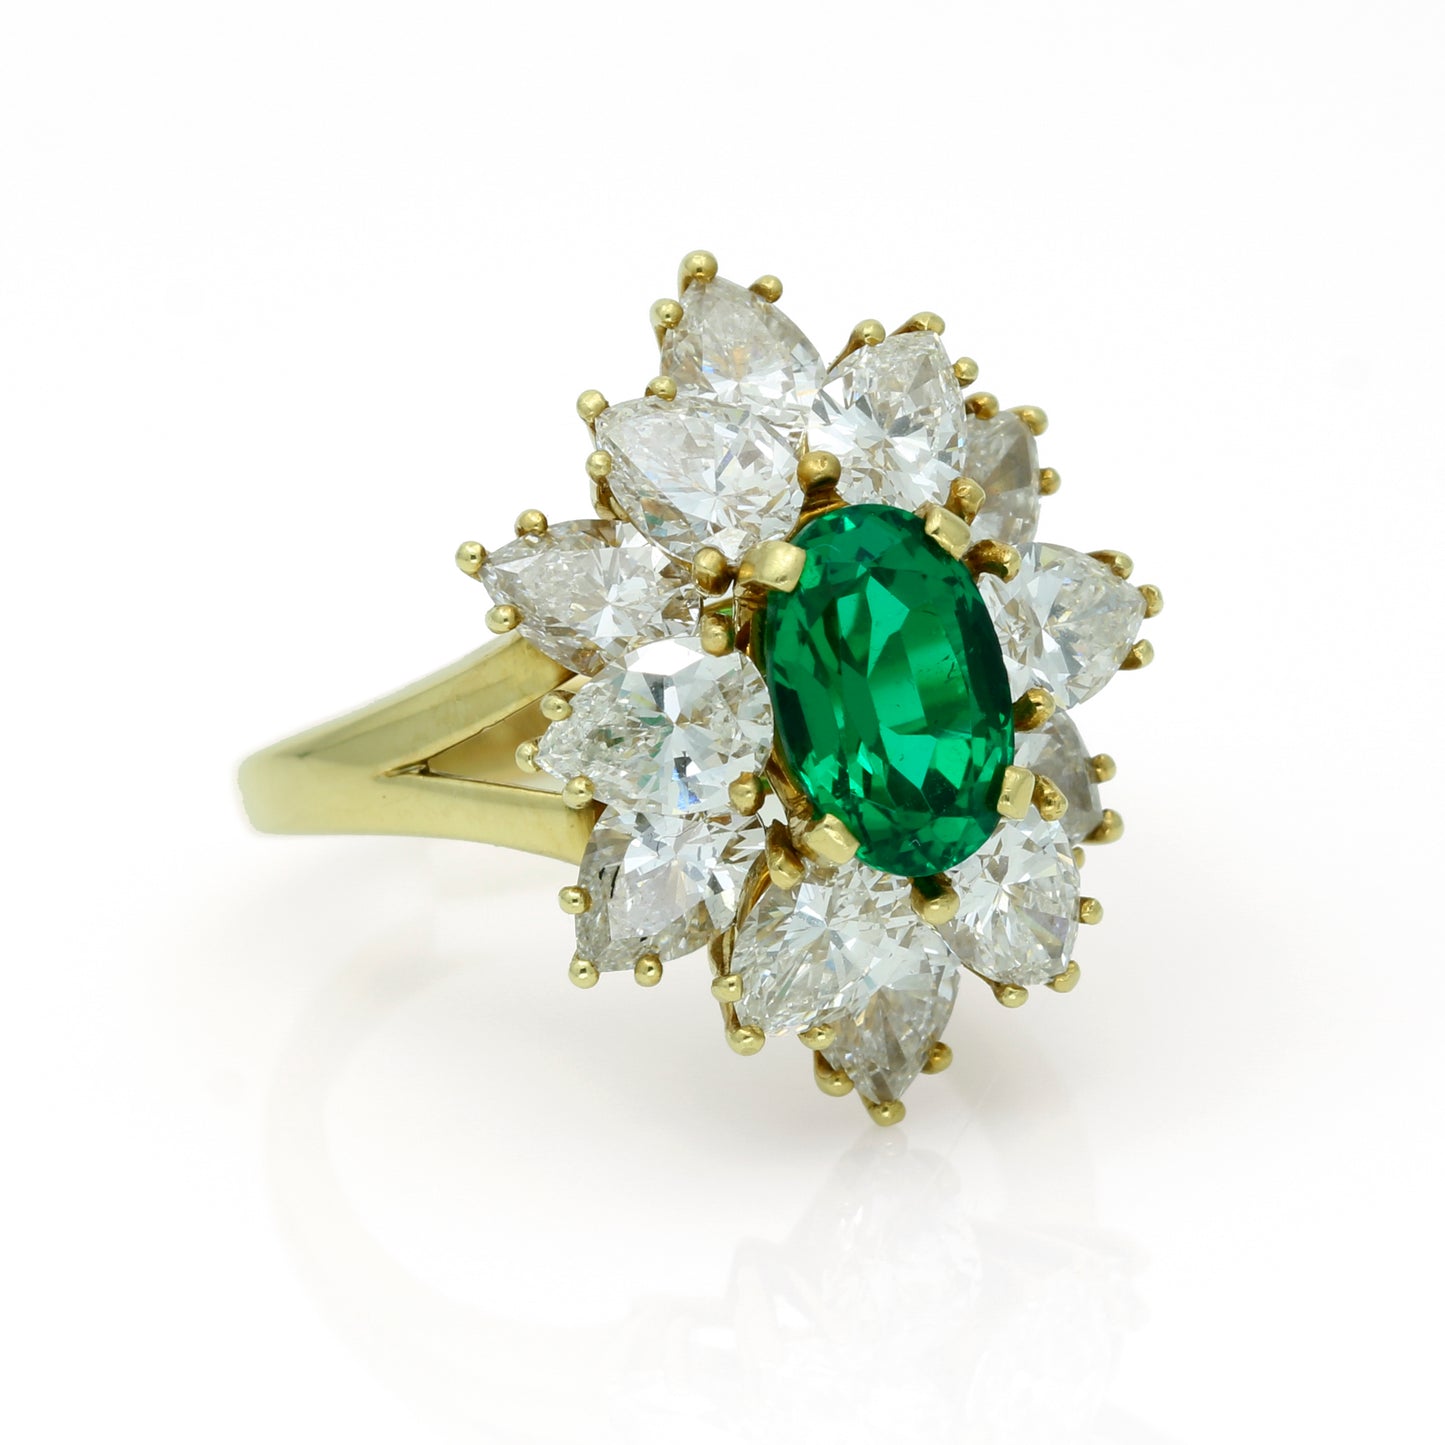 GIA Certified 1.77ct Emerald Diamond Statement Ring in 18k Yellow Gold